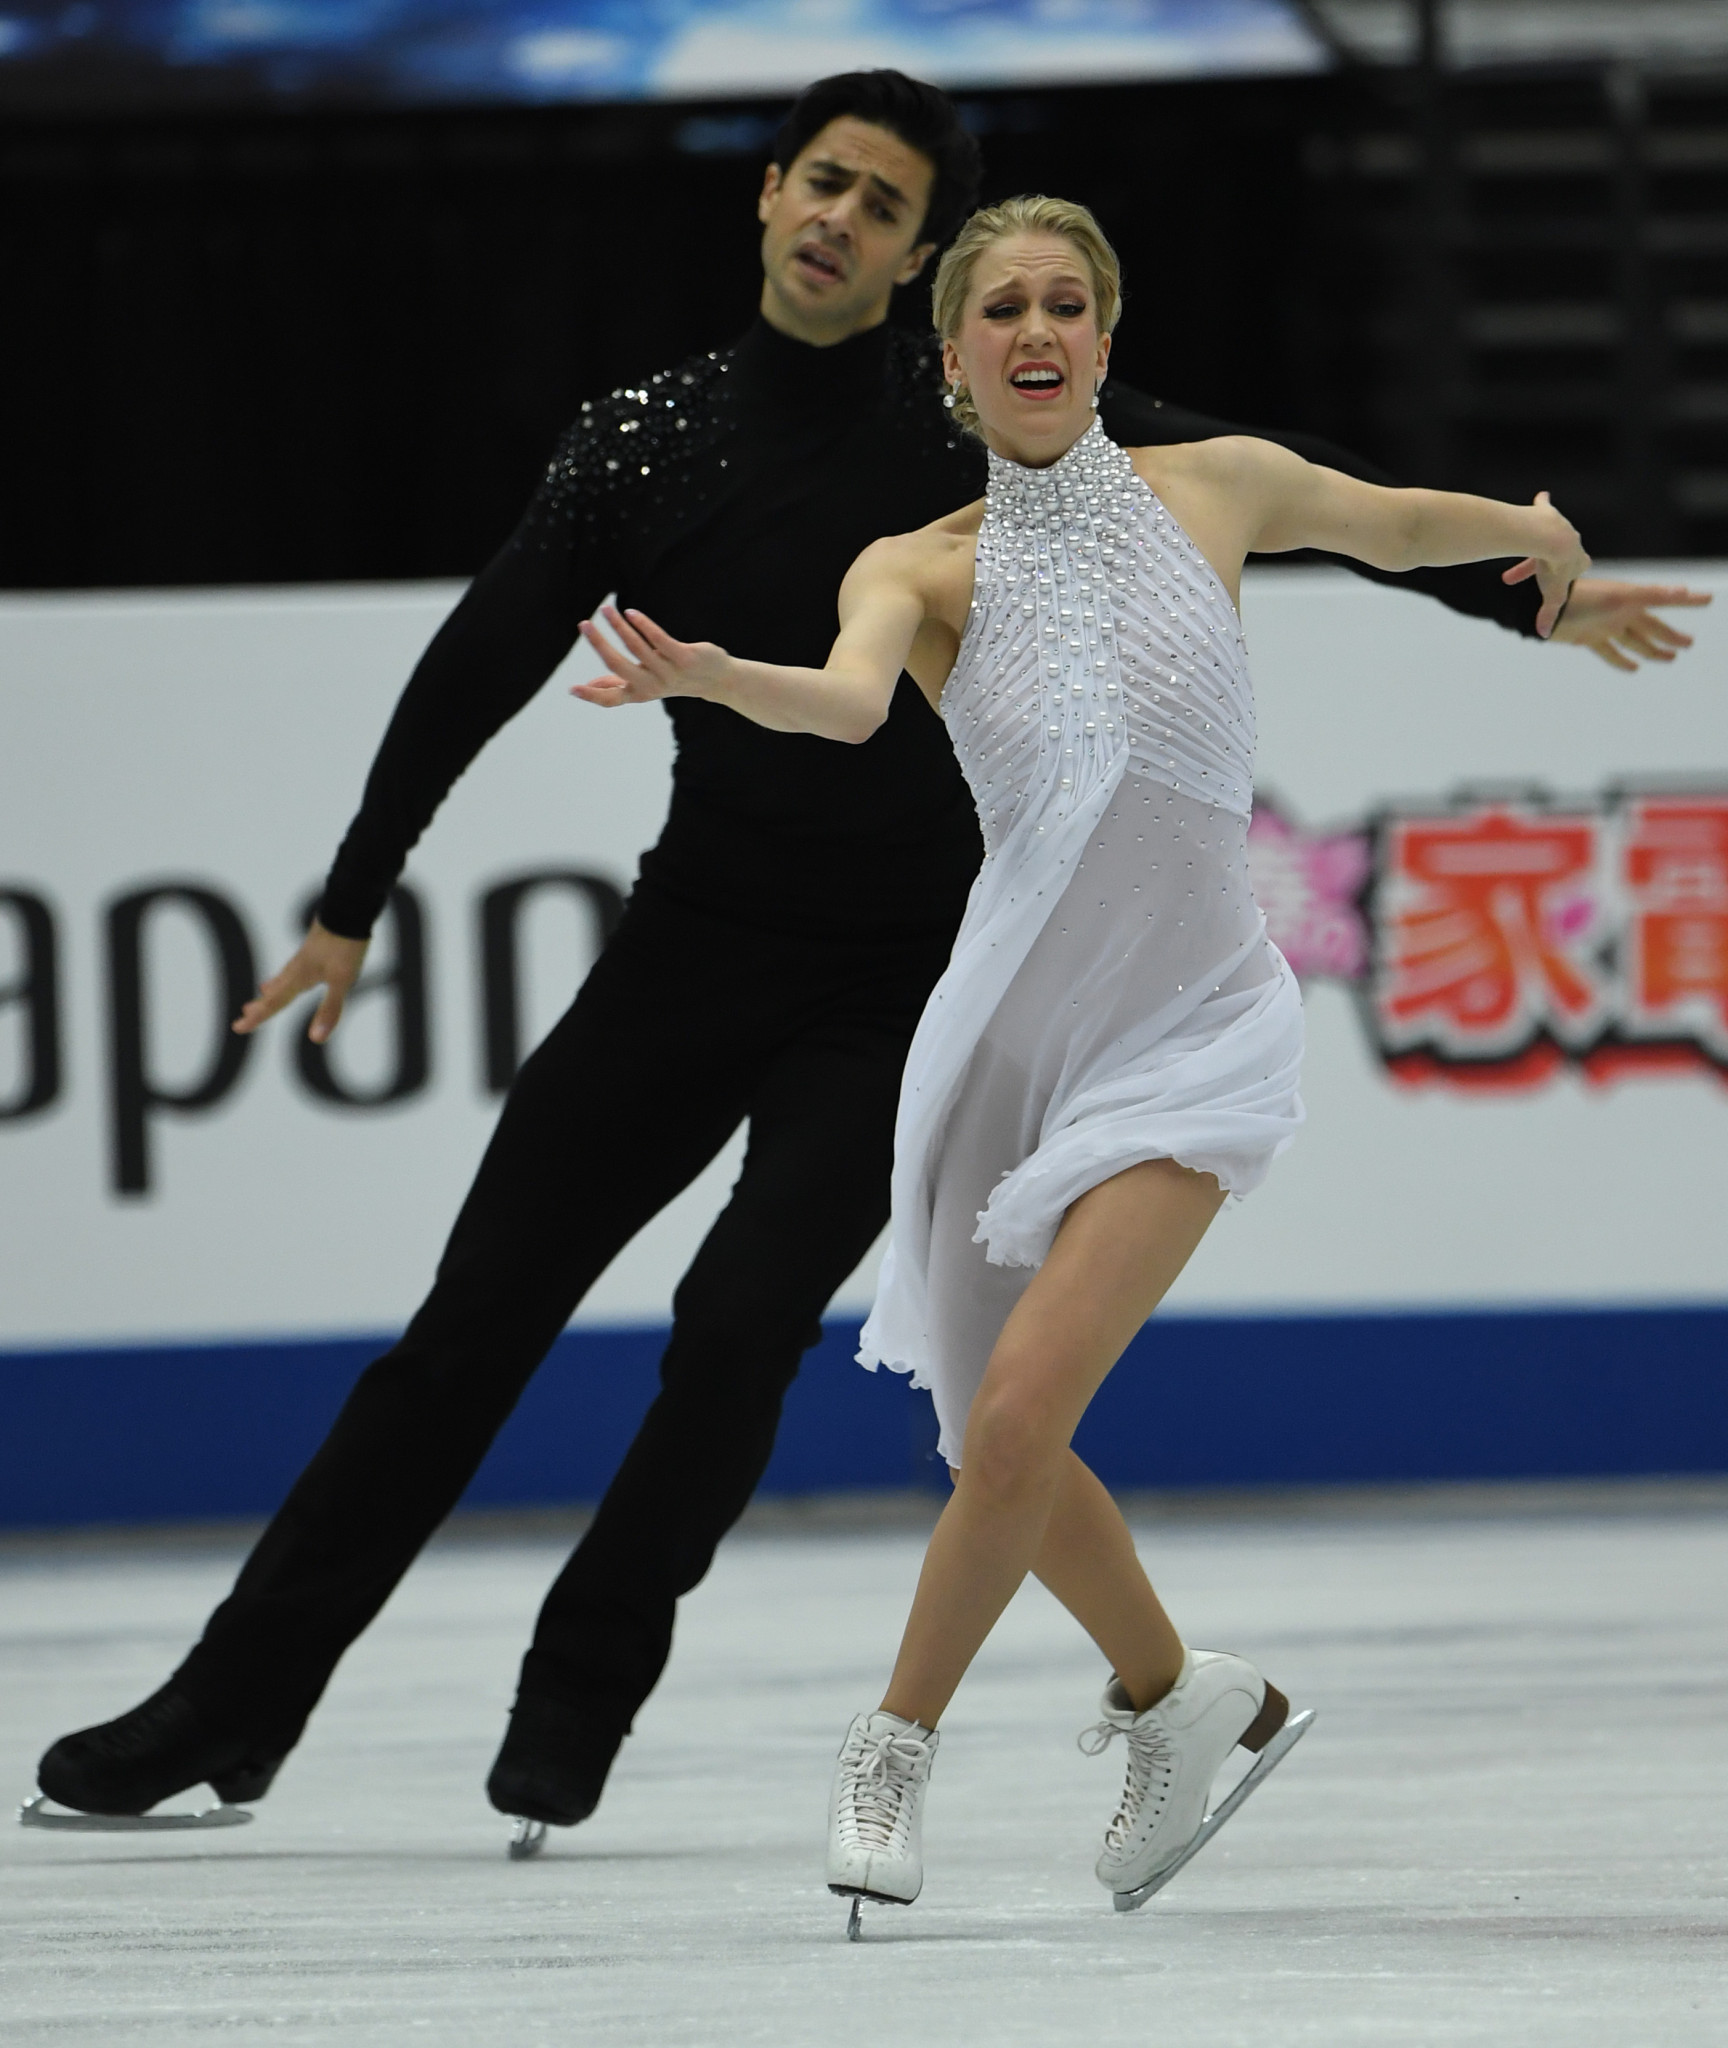 Canada's Weaver and Poje announce break from ice dancing